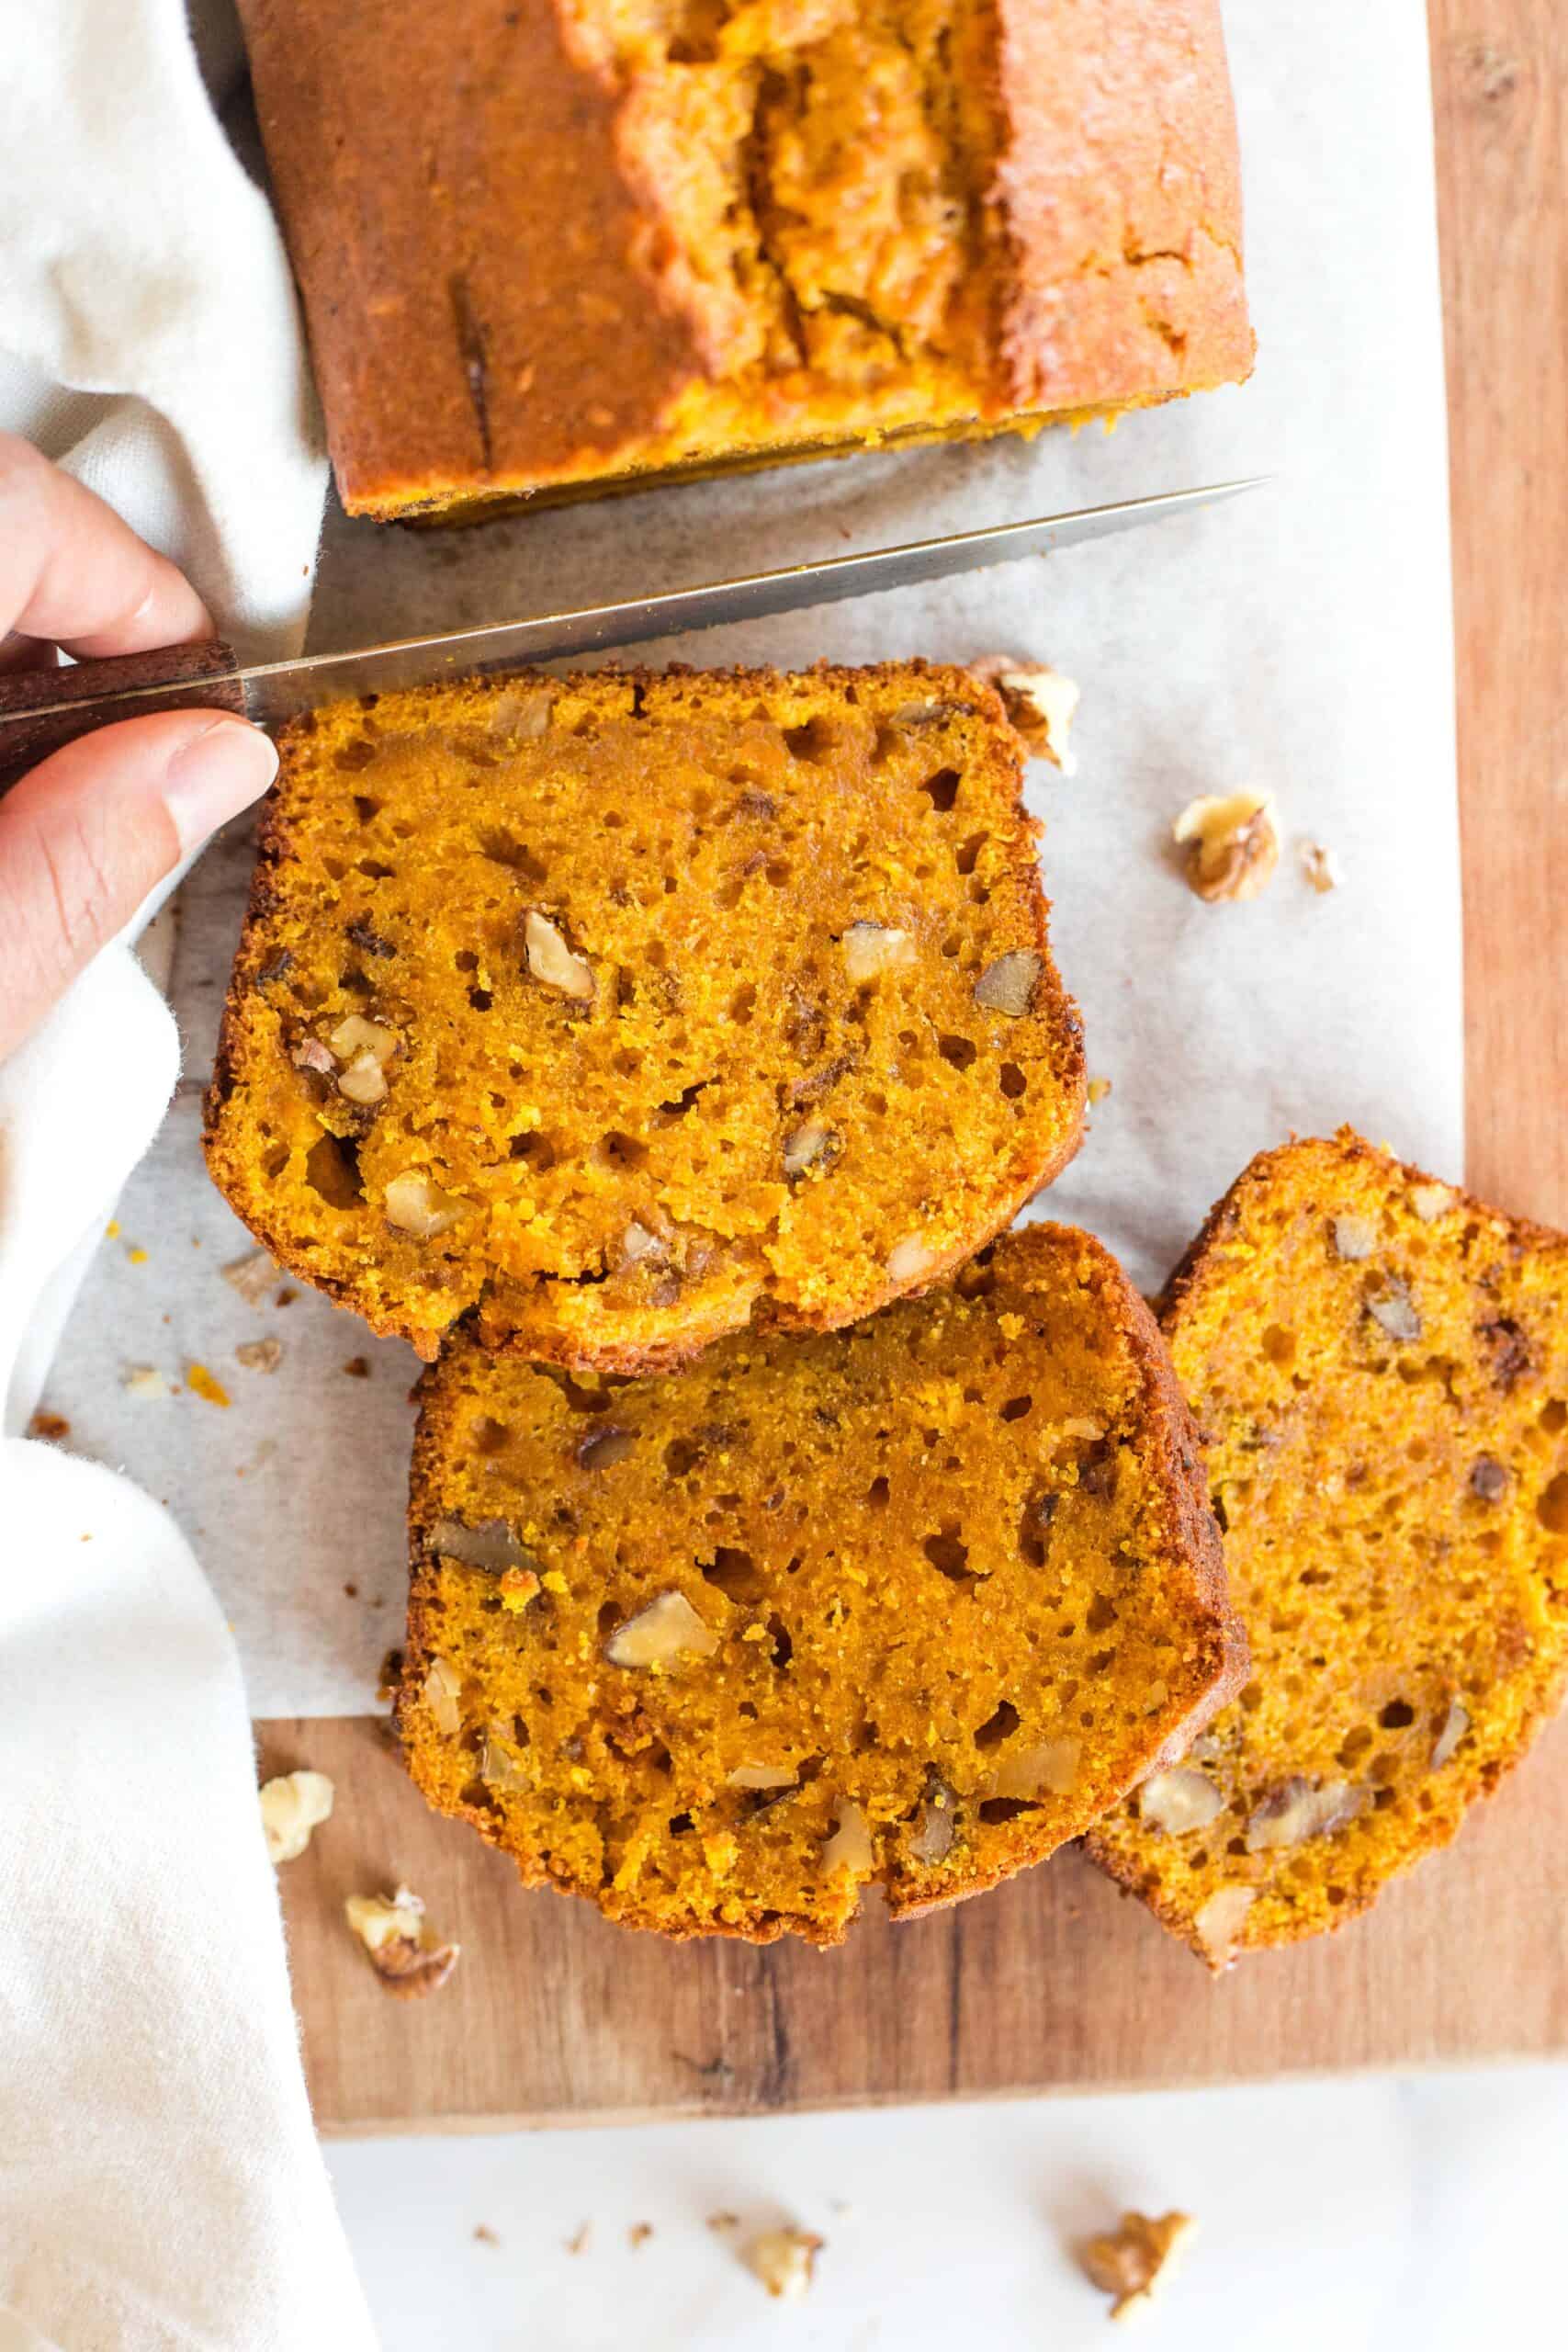 Slicing into a sweet potato loaf.